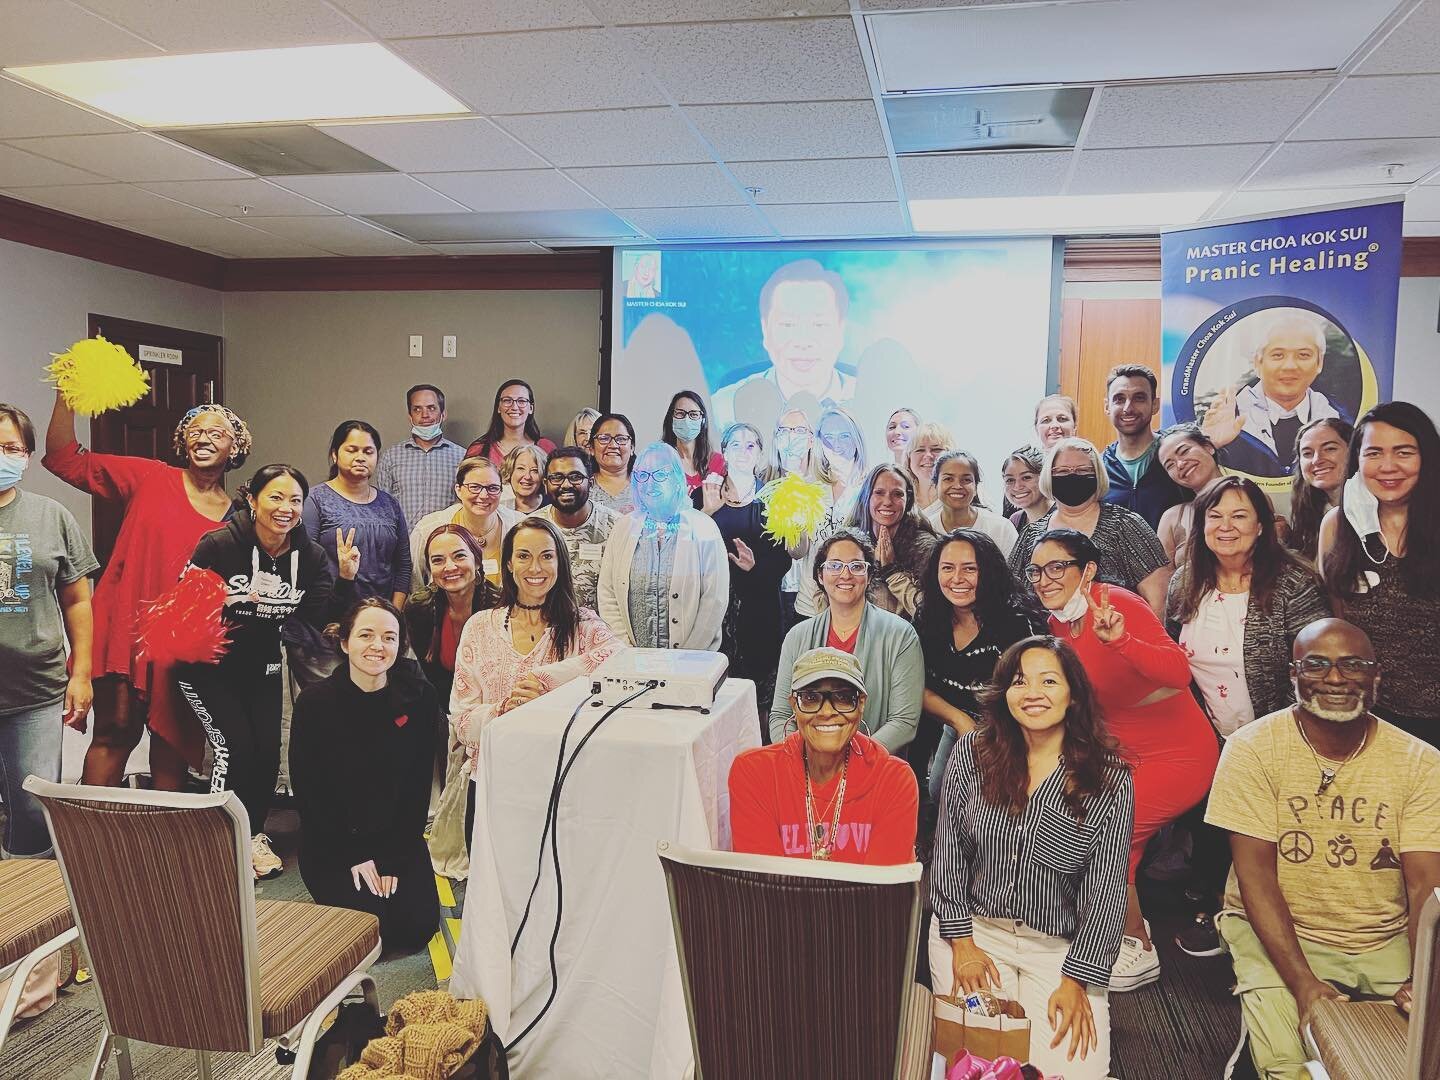 Kriyashakti course with Master Co was fantastic! So much fun getting to meet good people wanting to do good things learn how to have the prosperity to make it happen! So cool watching other locations (via zoom) around the Western USA wanting the same